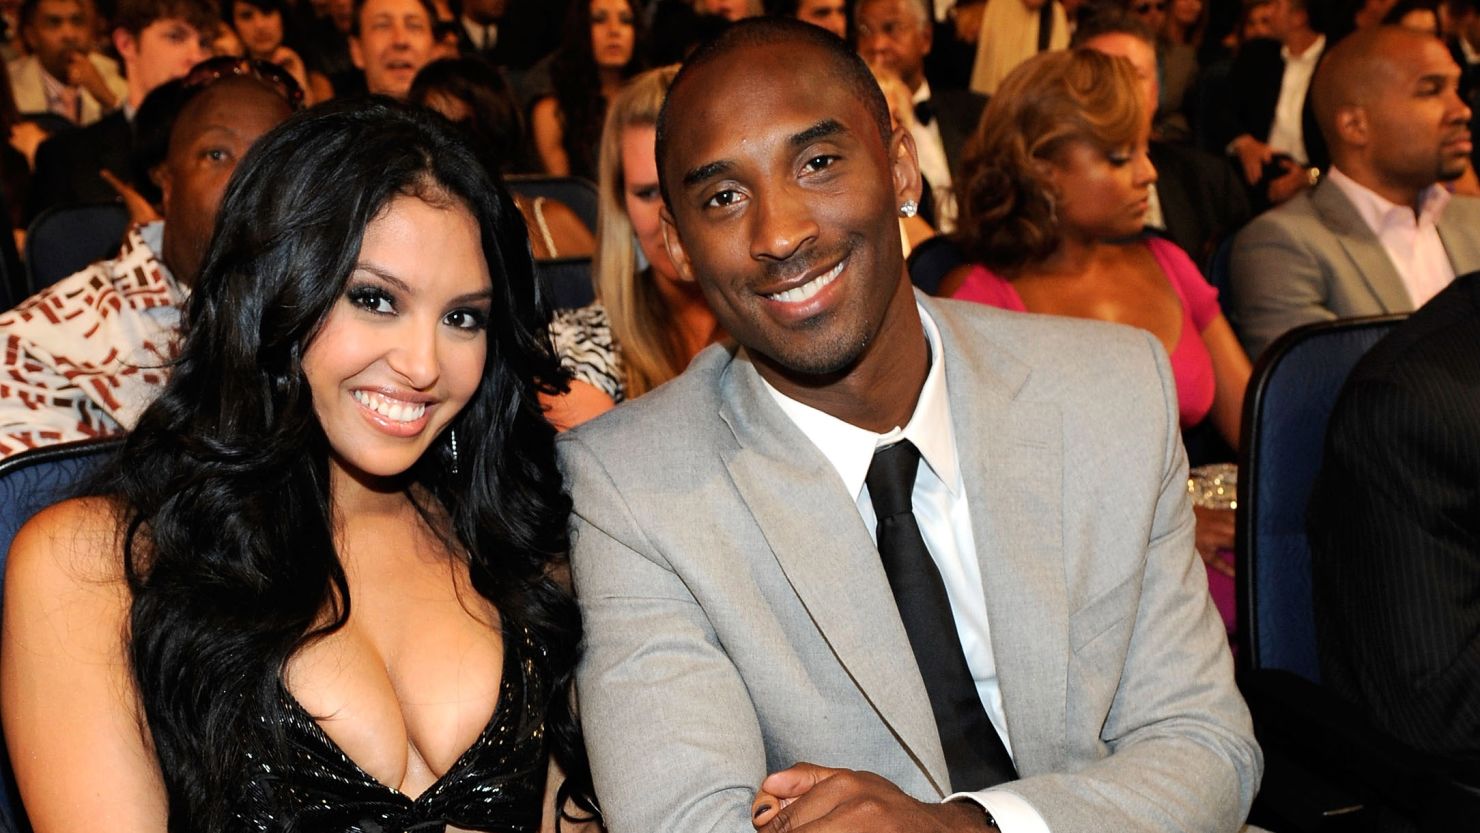 NBA star Kobe Bryant and wife Vanessa have called off their divorce proceedings, they announced on social media.